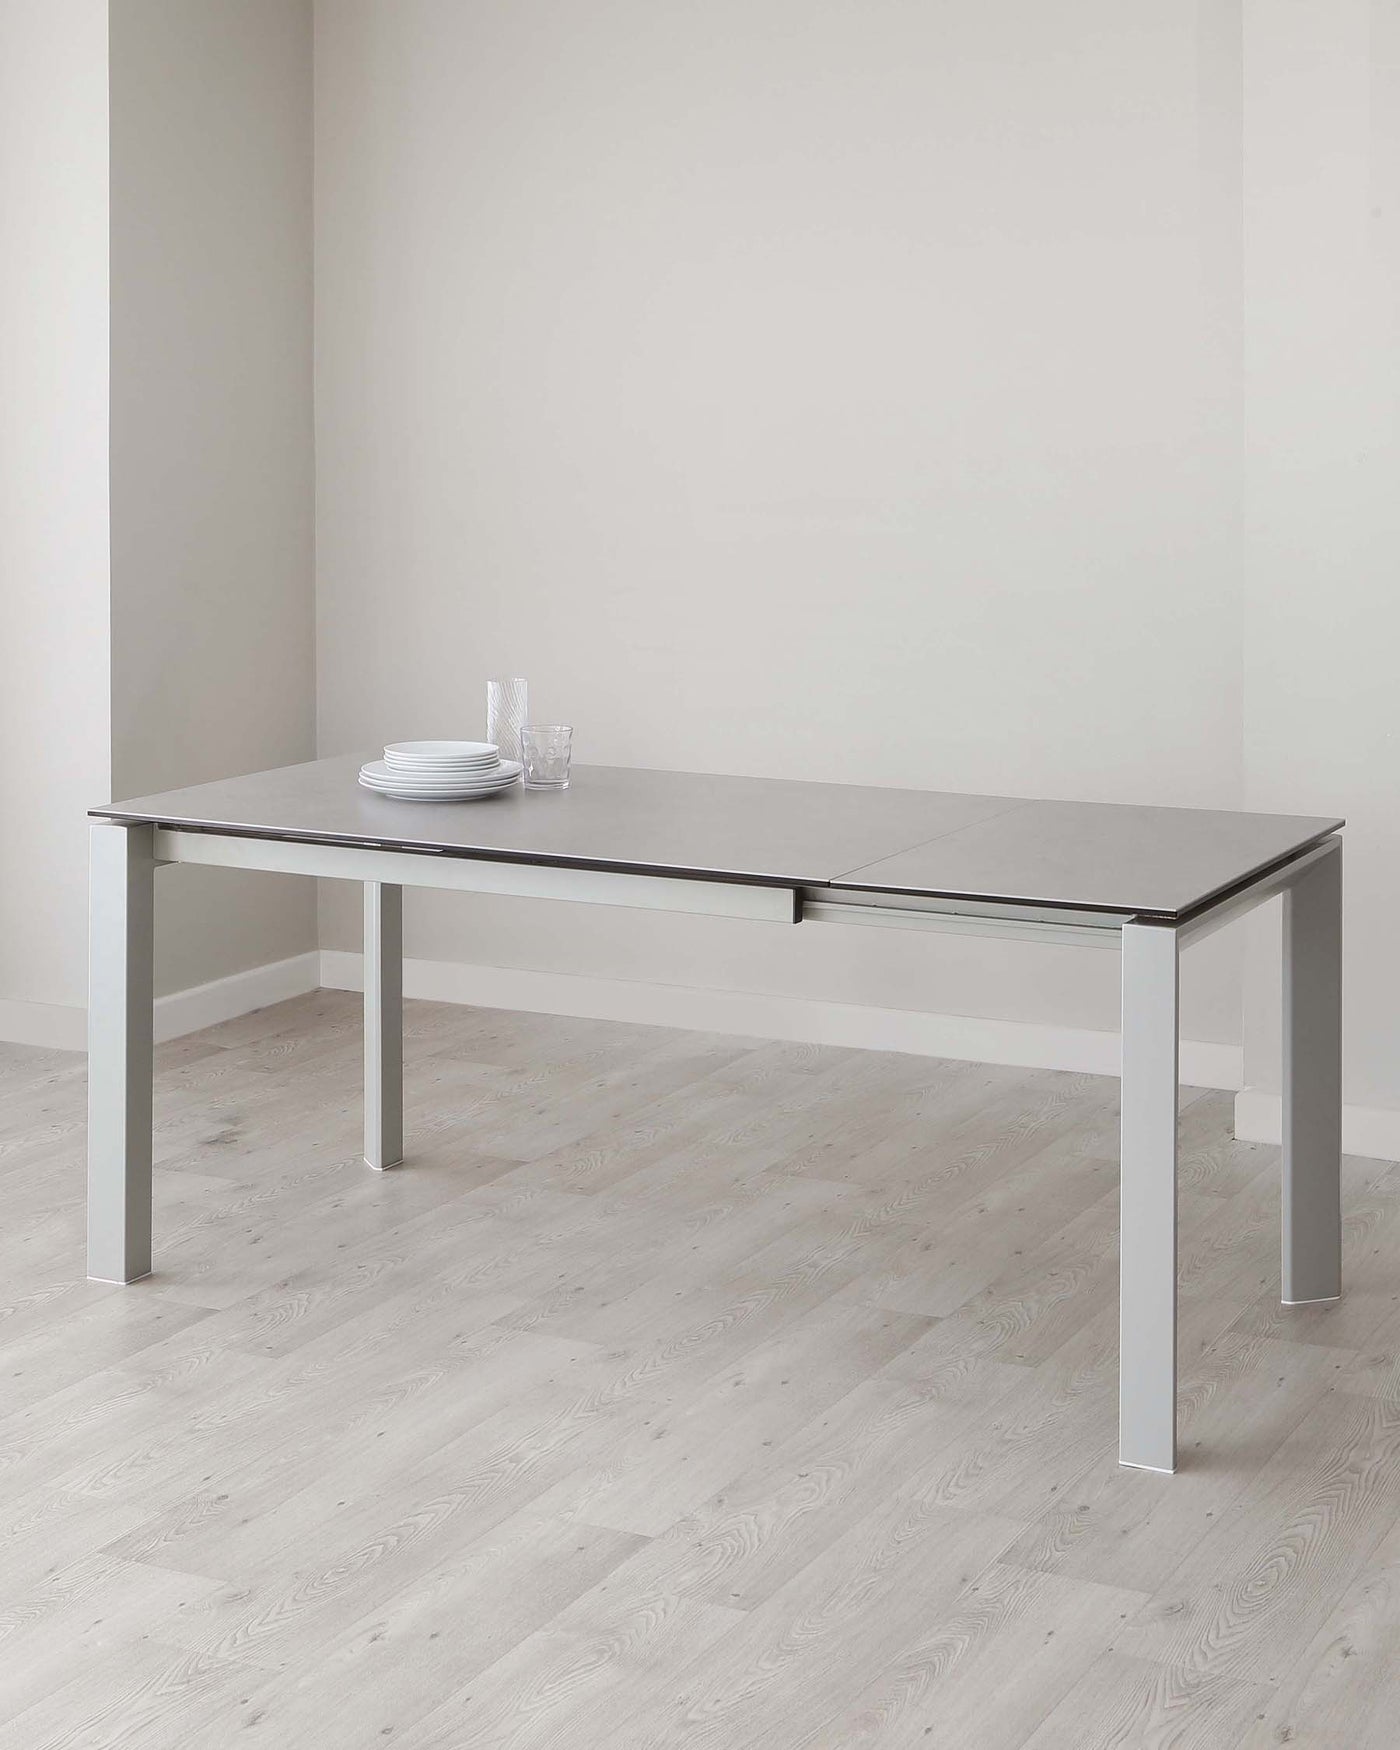 Modern minimalist extendable dining table with a light grey tabletop and sleek silver metal legs, set against a neutral background with a simple place setting.